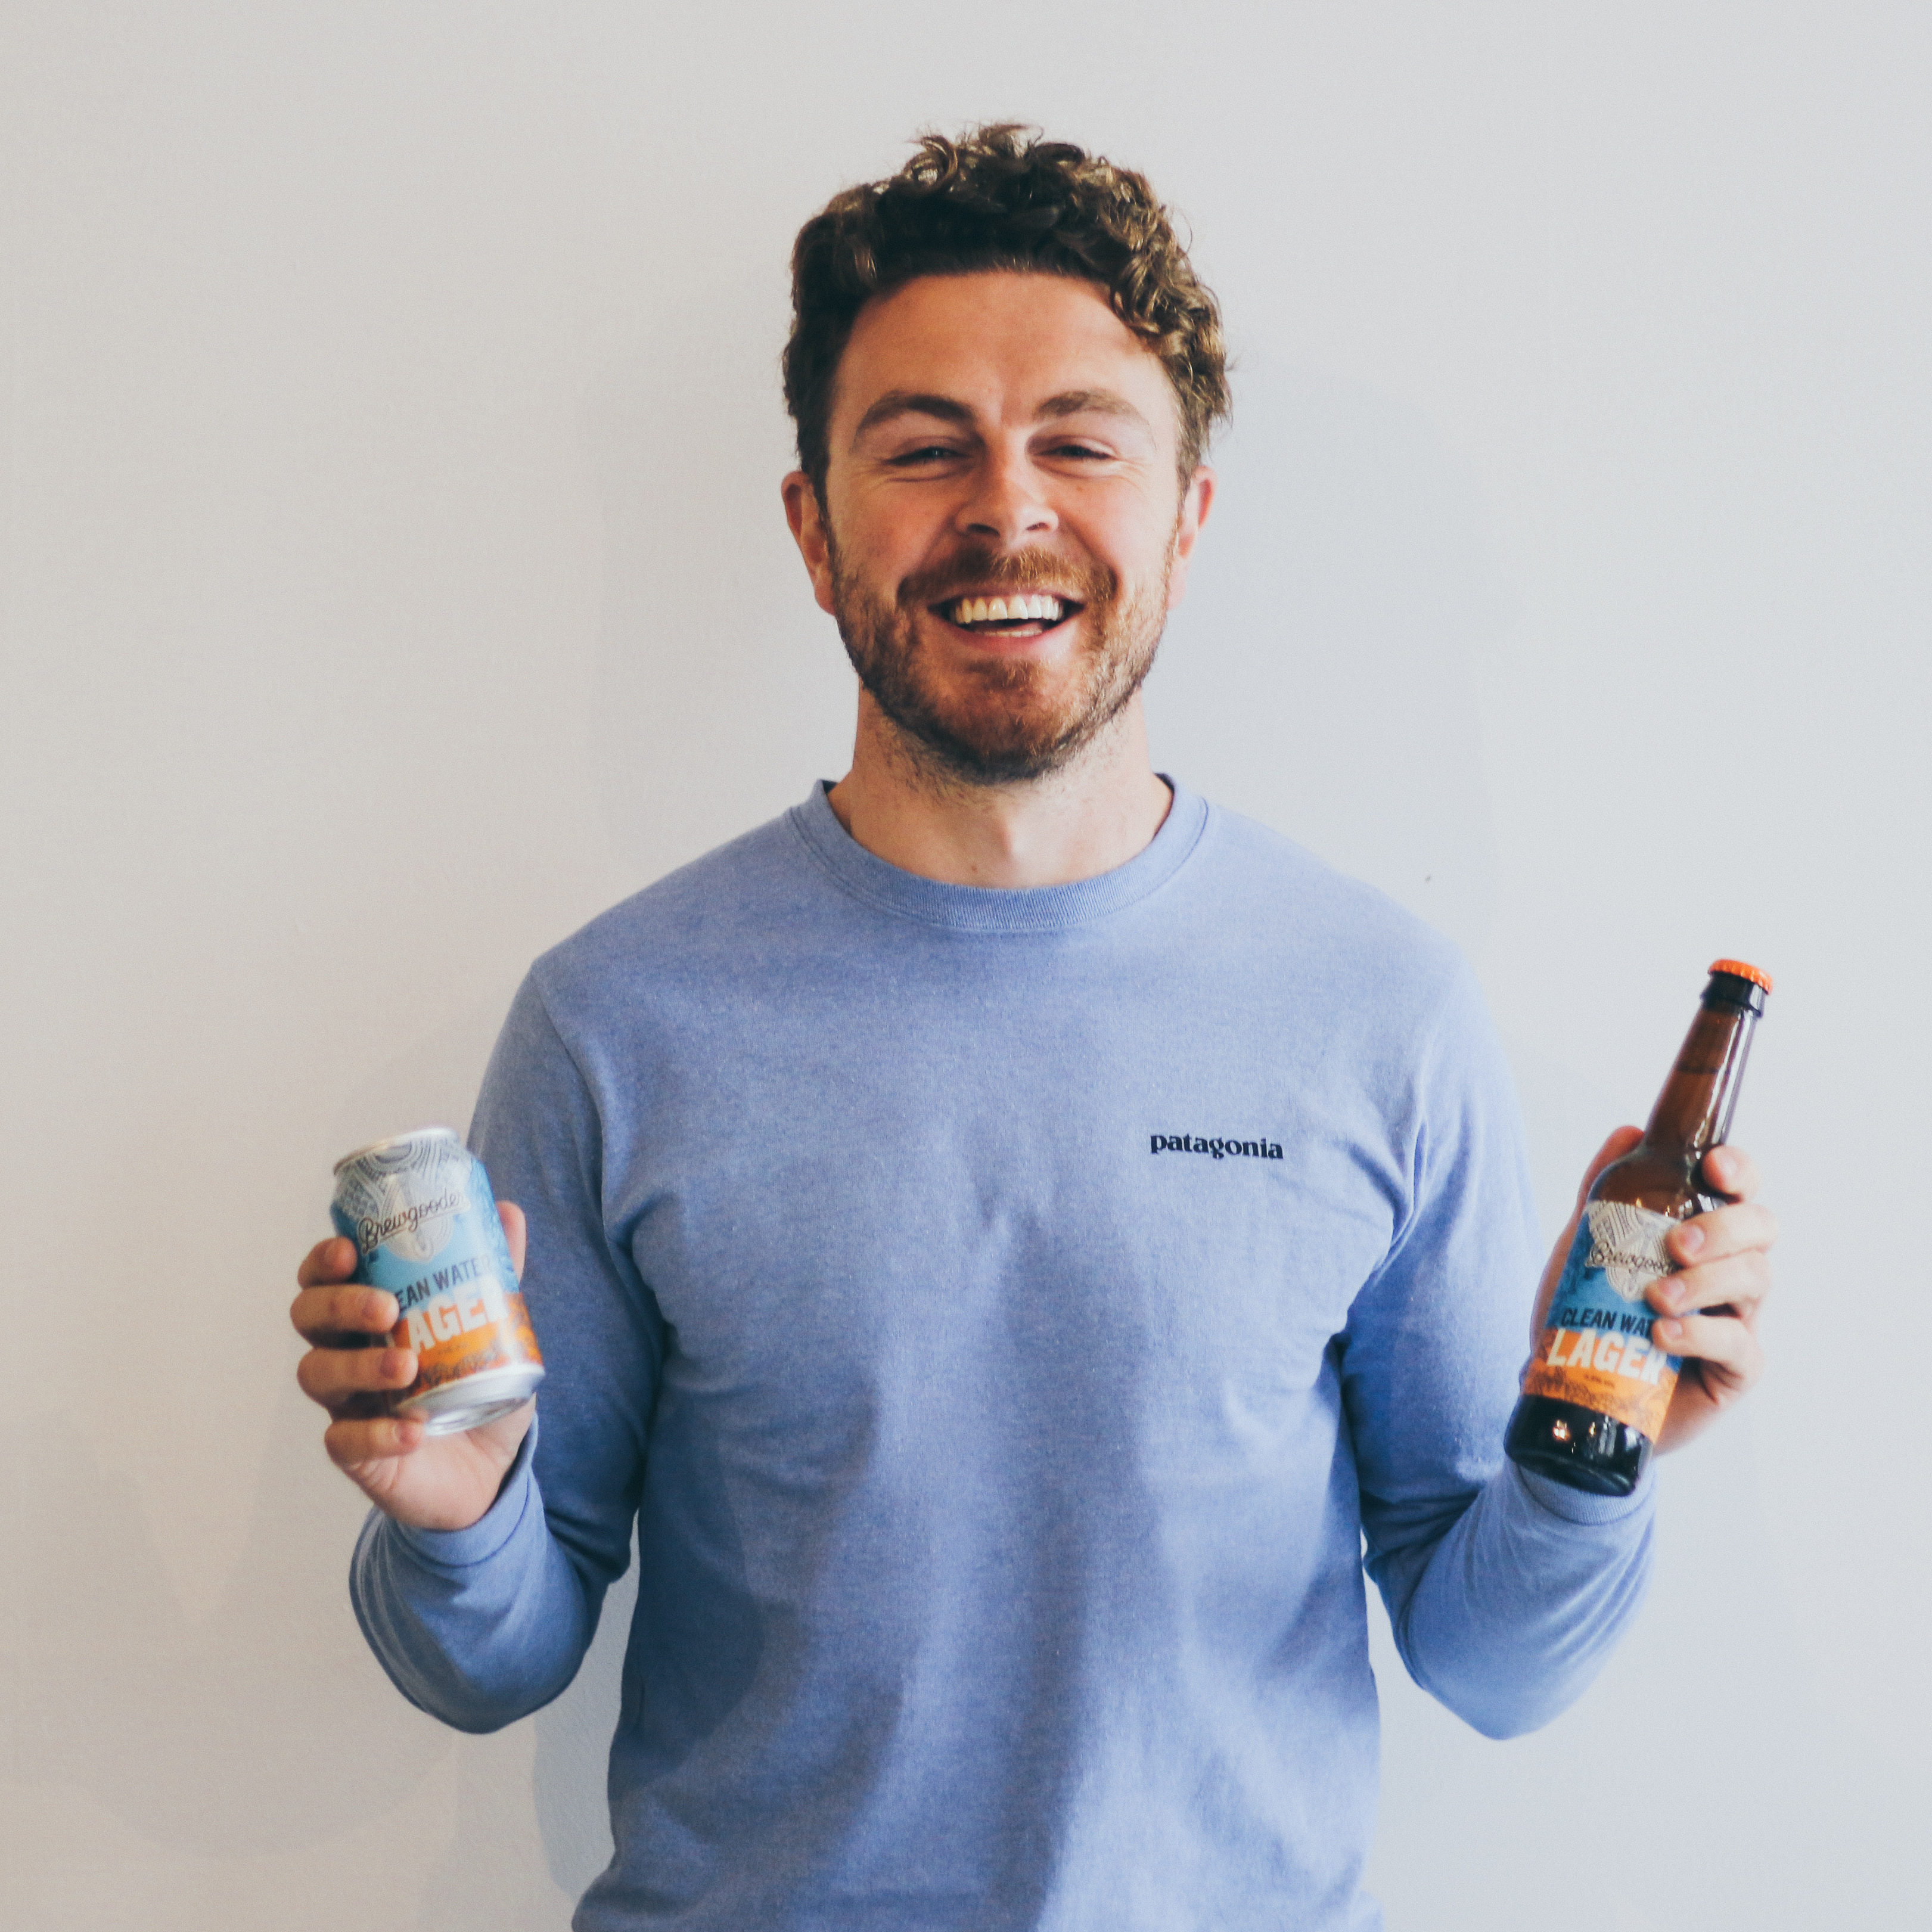 Glasgow-based Brewgooder launches £250k clean water fundraiser campaign